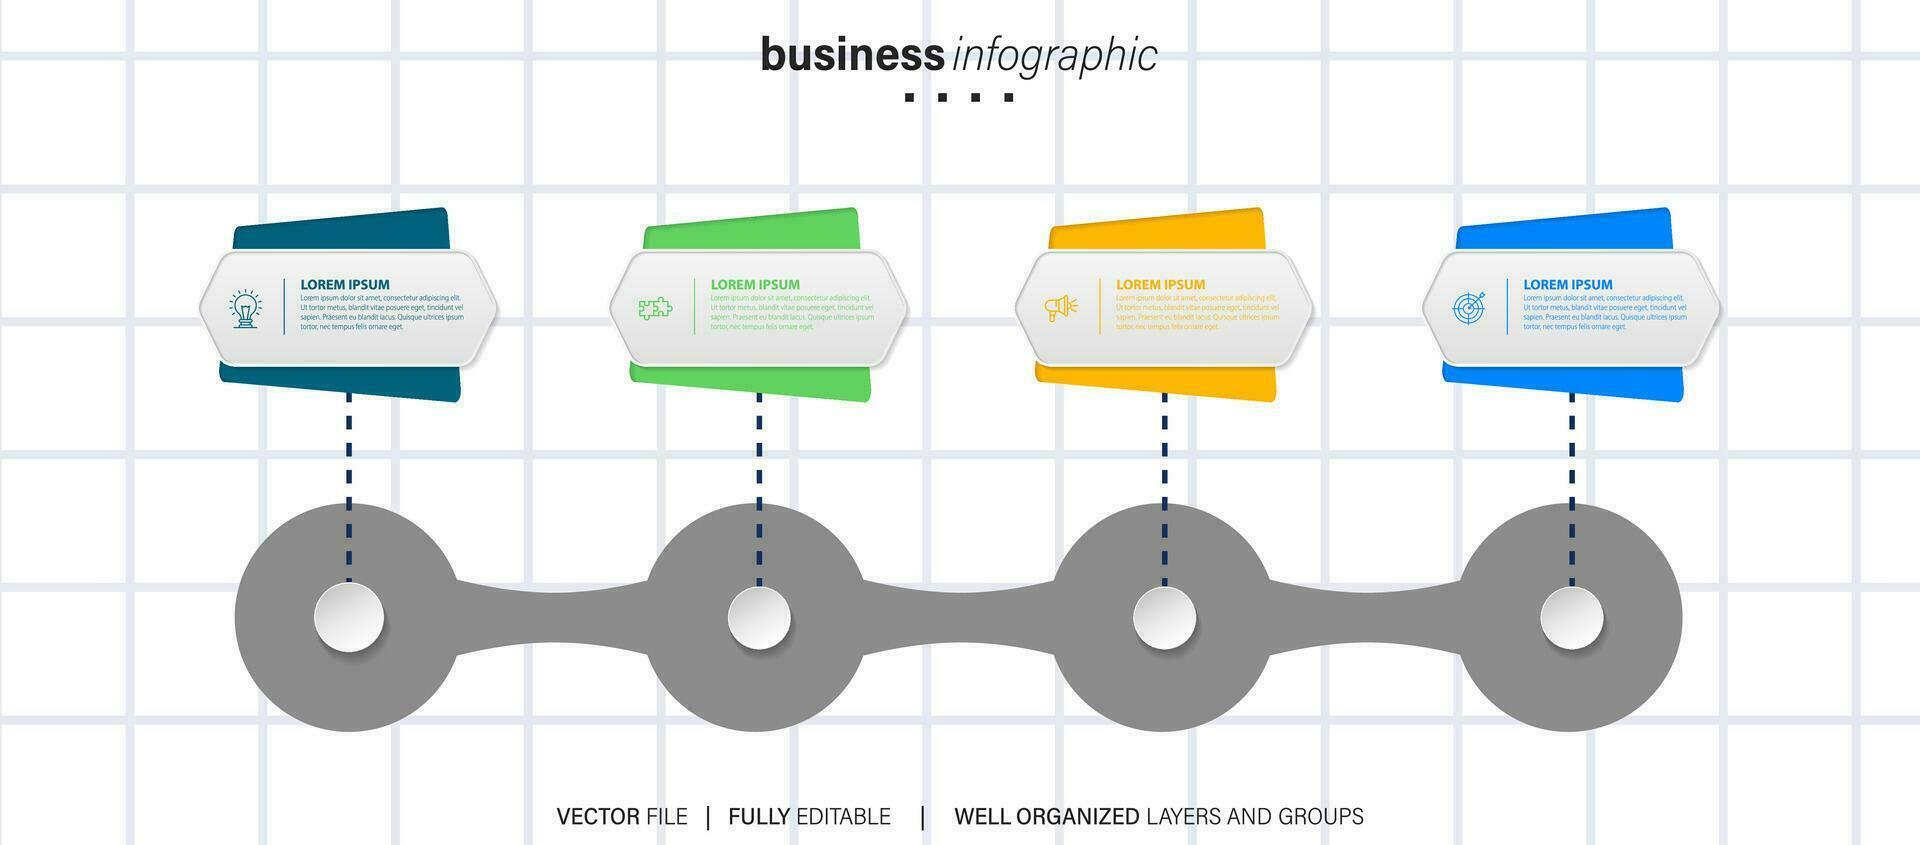 Timeline infographic thin line design with icons. Template for graph, diagram, presentations. Business concept with 4 options. Vector illustration.